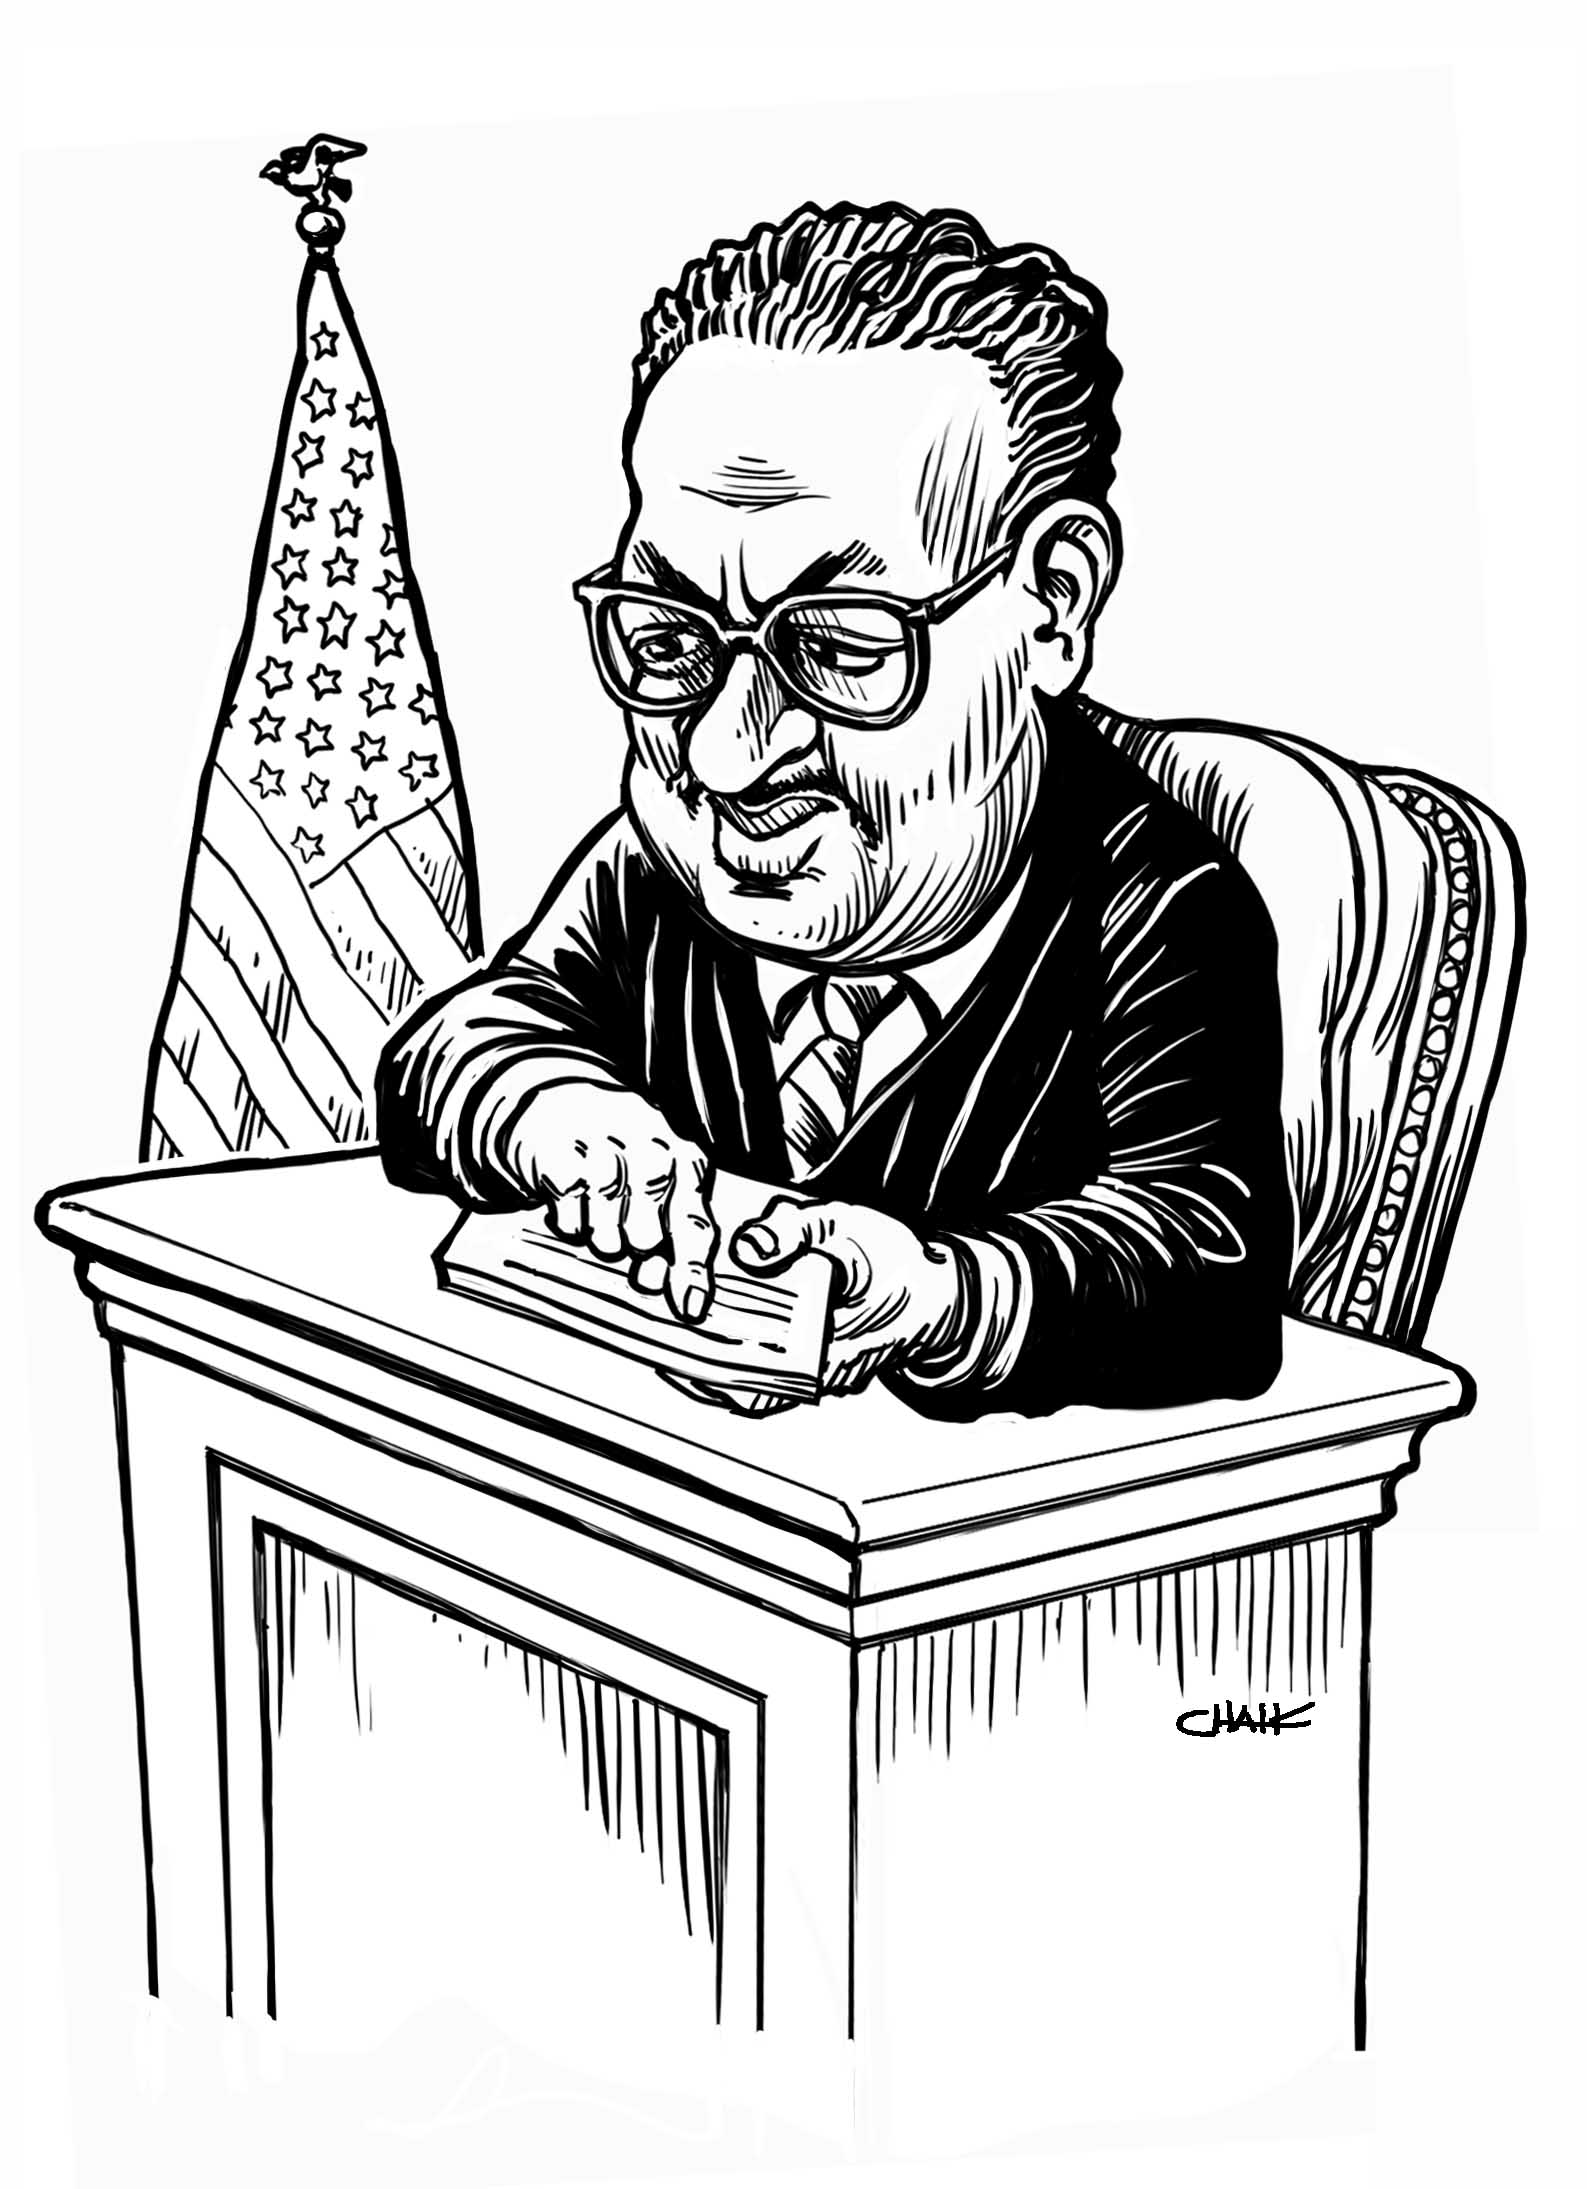 Thurgood Marshall Coloring Page Coloring Pages